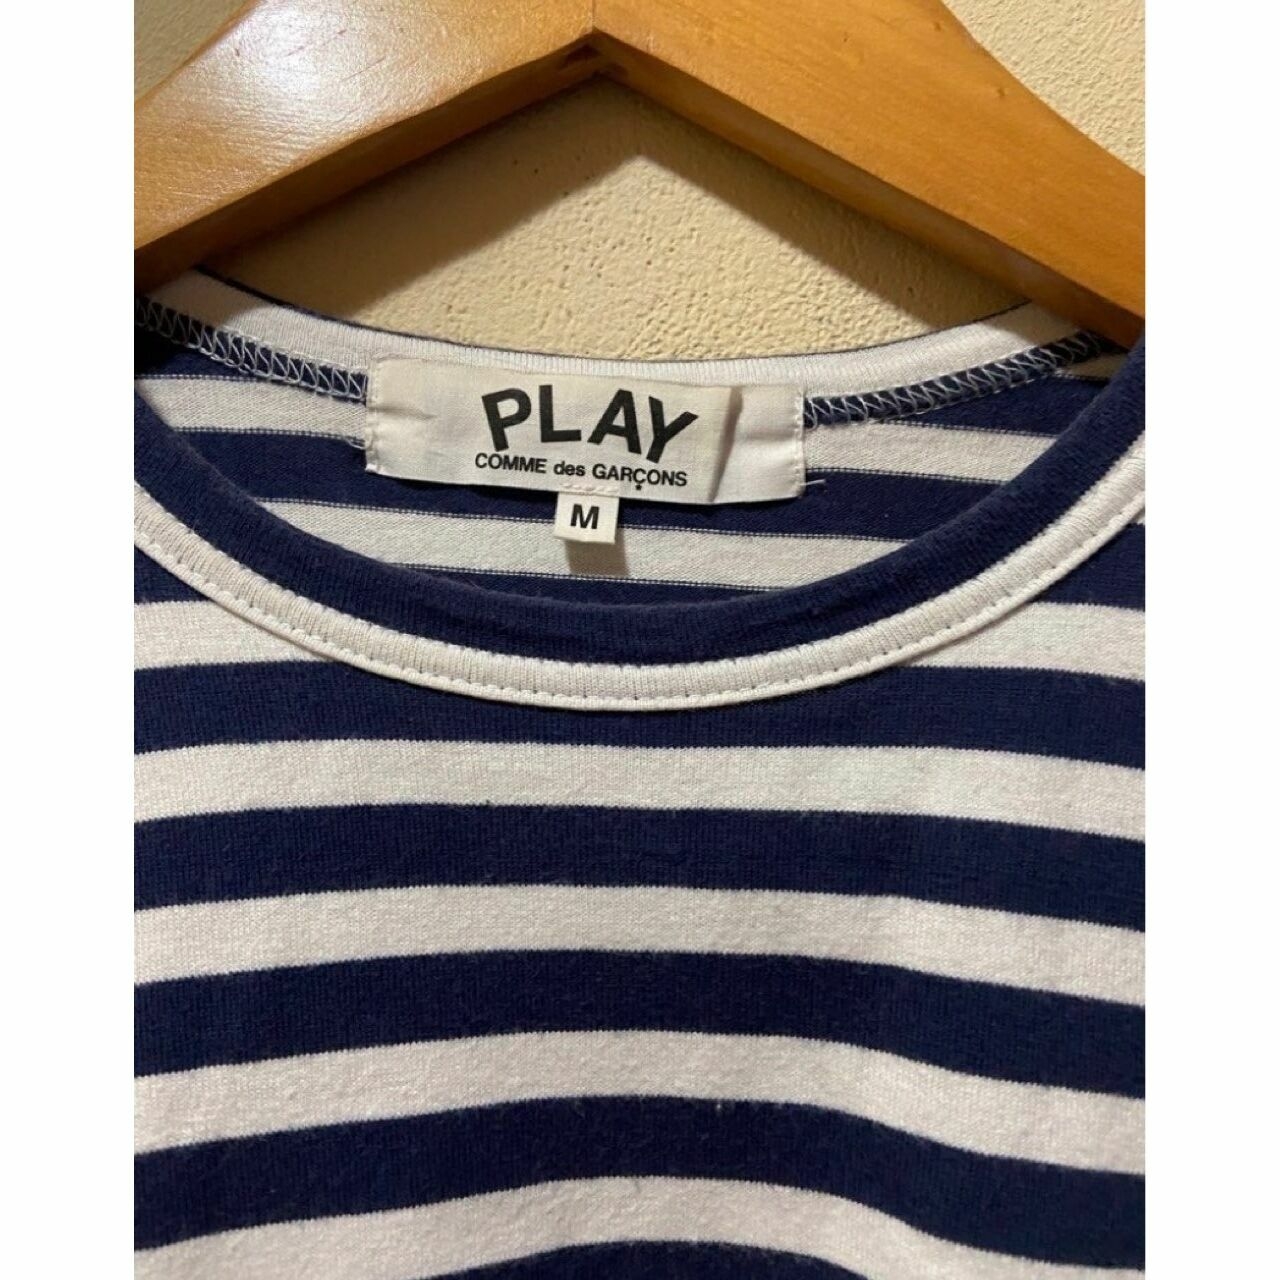 Play by Comme des Garcons Navy & White Stripes Long Sleeve Tshirt